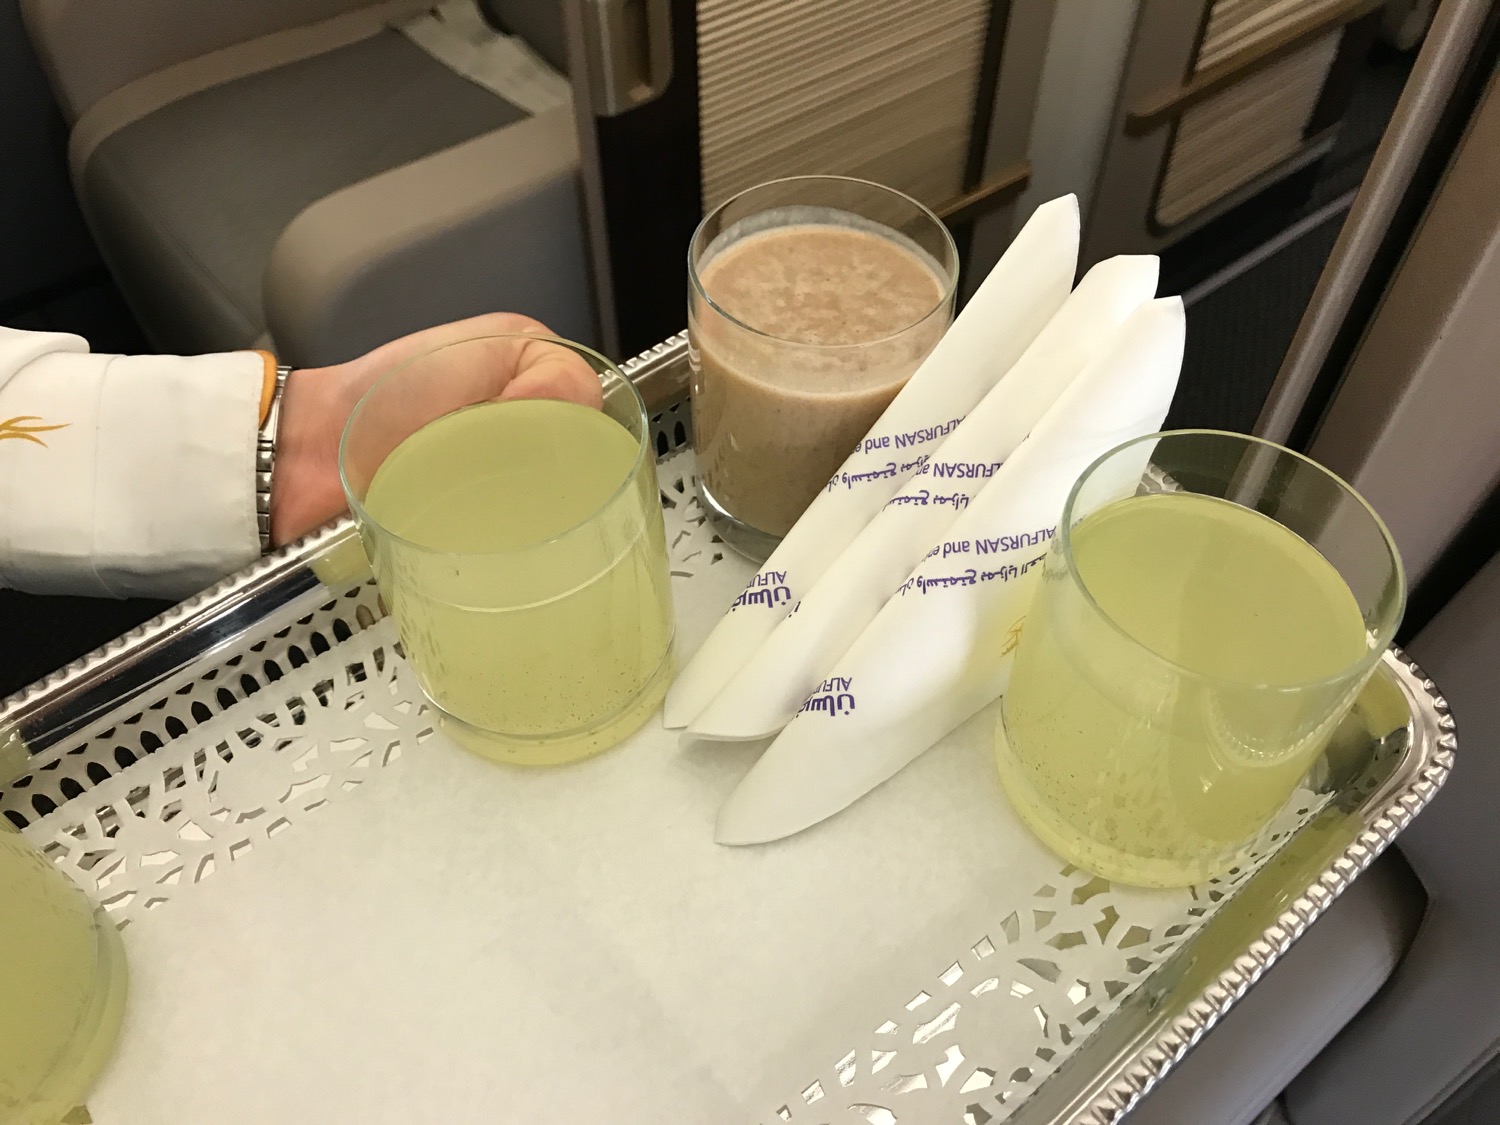 a tray with glasses and napkins on it